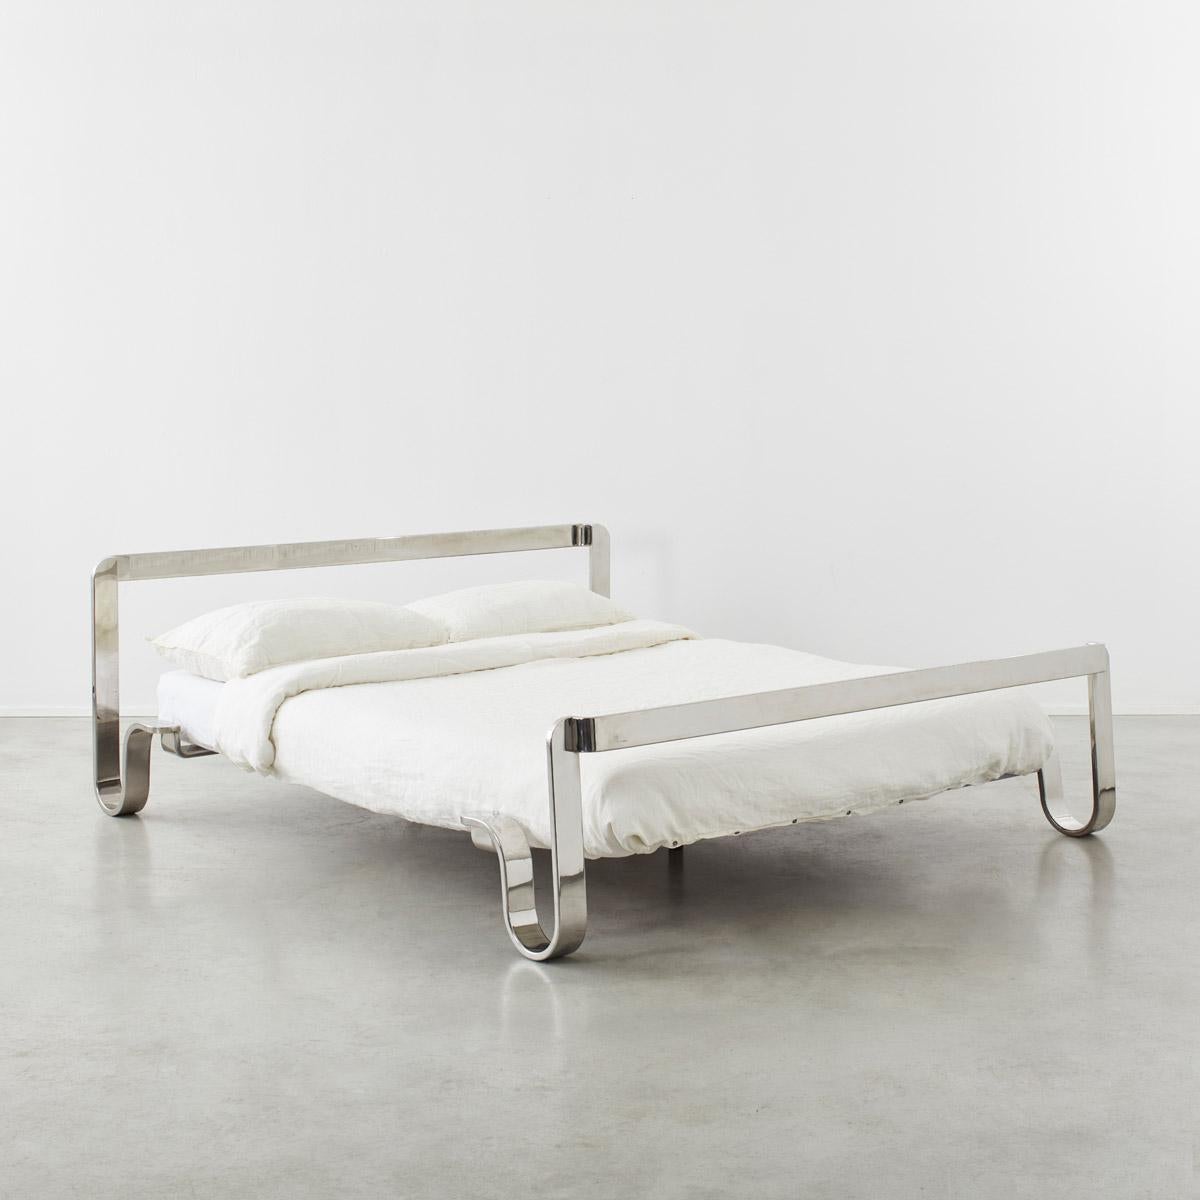 Ribbons of stainless steel unfurl into a sinuous bed frame, designed by Sergio Chiappa-Cattò, Angelo Cortesi & Carlo Torrigiani Aucuba. Its lithe form is minimalistic, but the polished metal speaks of science and the technological triumphs of the